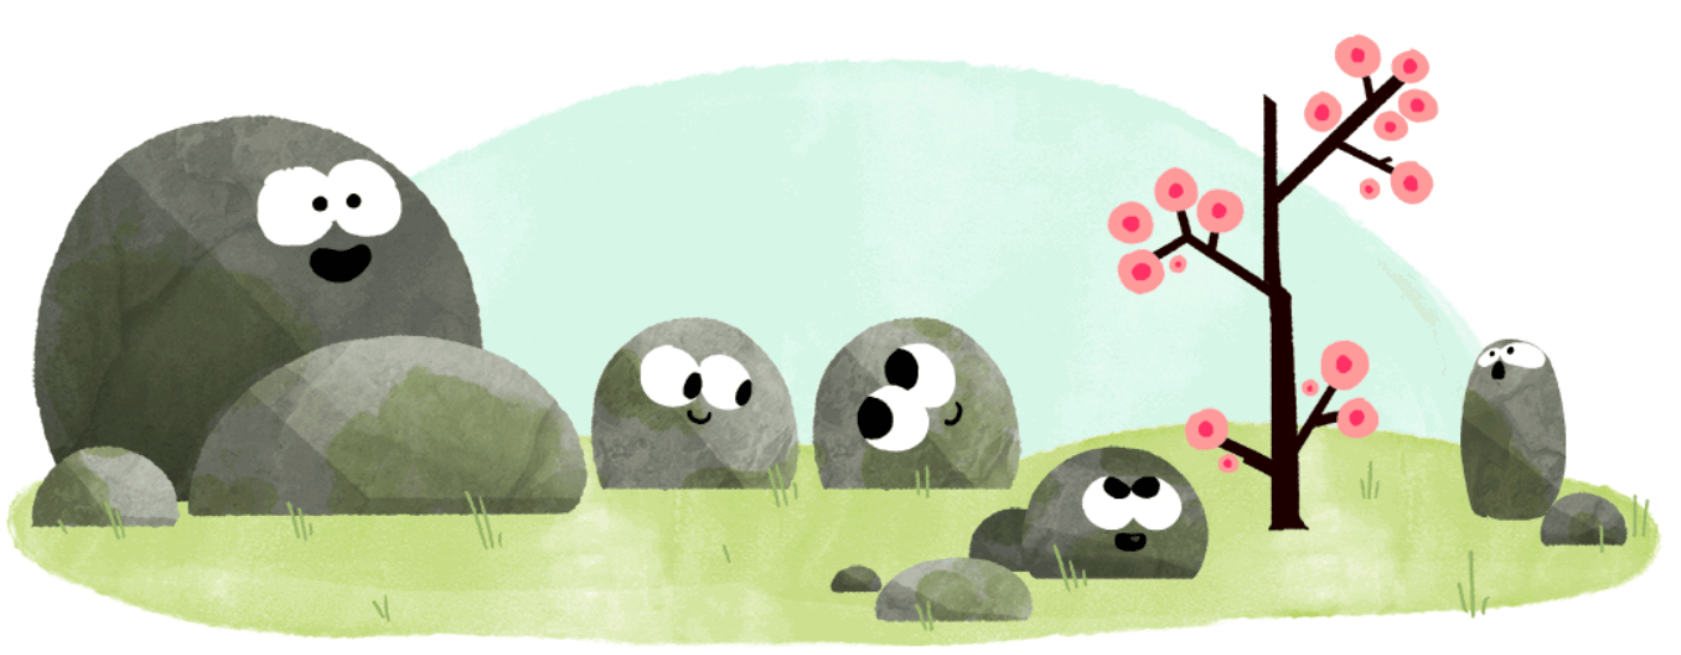 Spring Google Logo - Vernal Equinox Google doodle welcomes the first day of spring